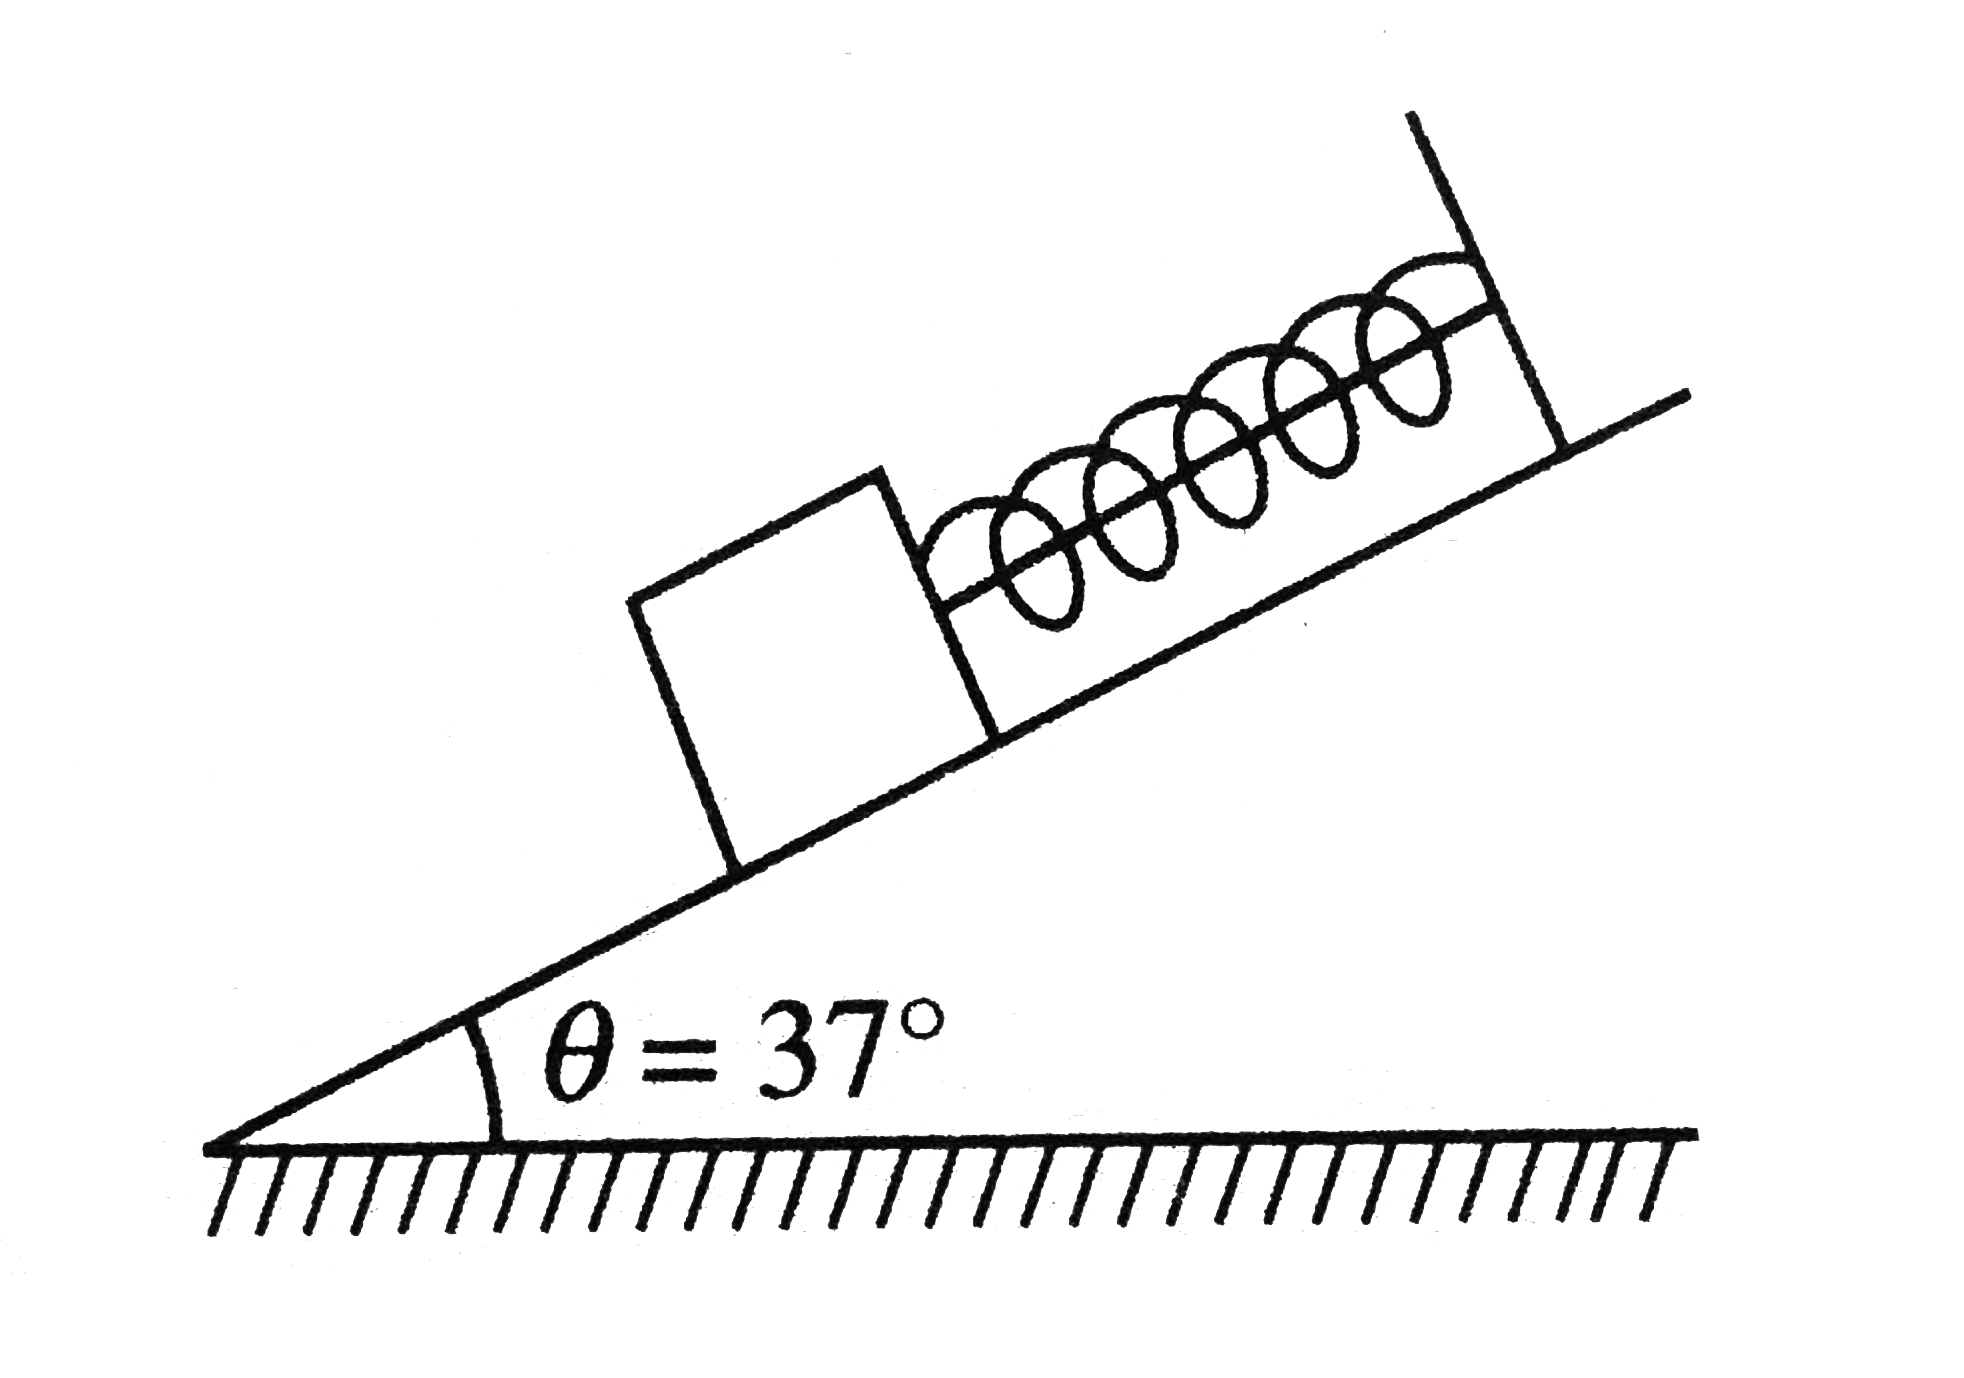 A small block of mass m=1kg is attached with one end of the spring of force constant K=110Nm^-1. Other end of the spring is fixed to a rough plane having coefficient of friction mu=0.2. The spring is kept in its natural length by an inextensible thread ties between its ends as shown in figure. If the thread is burnt, calculate the elongation of the spring when the block attains static equilibrium position.